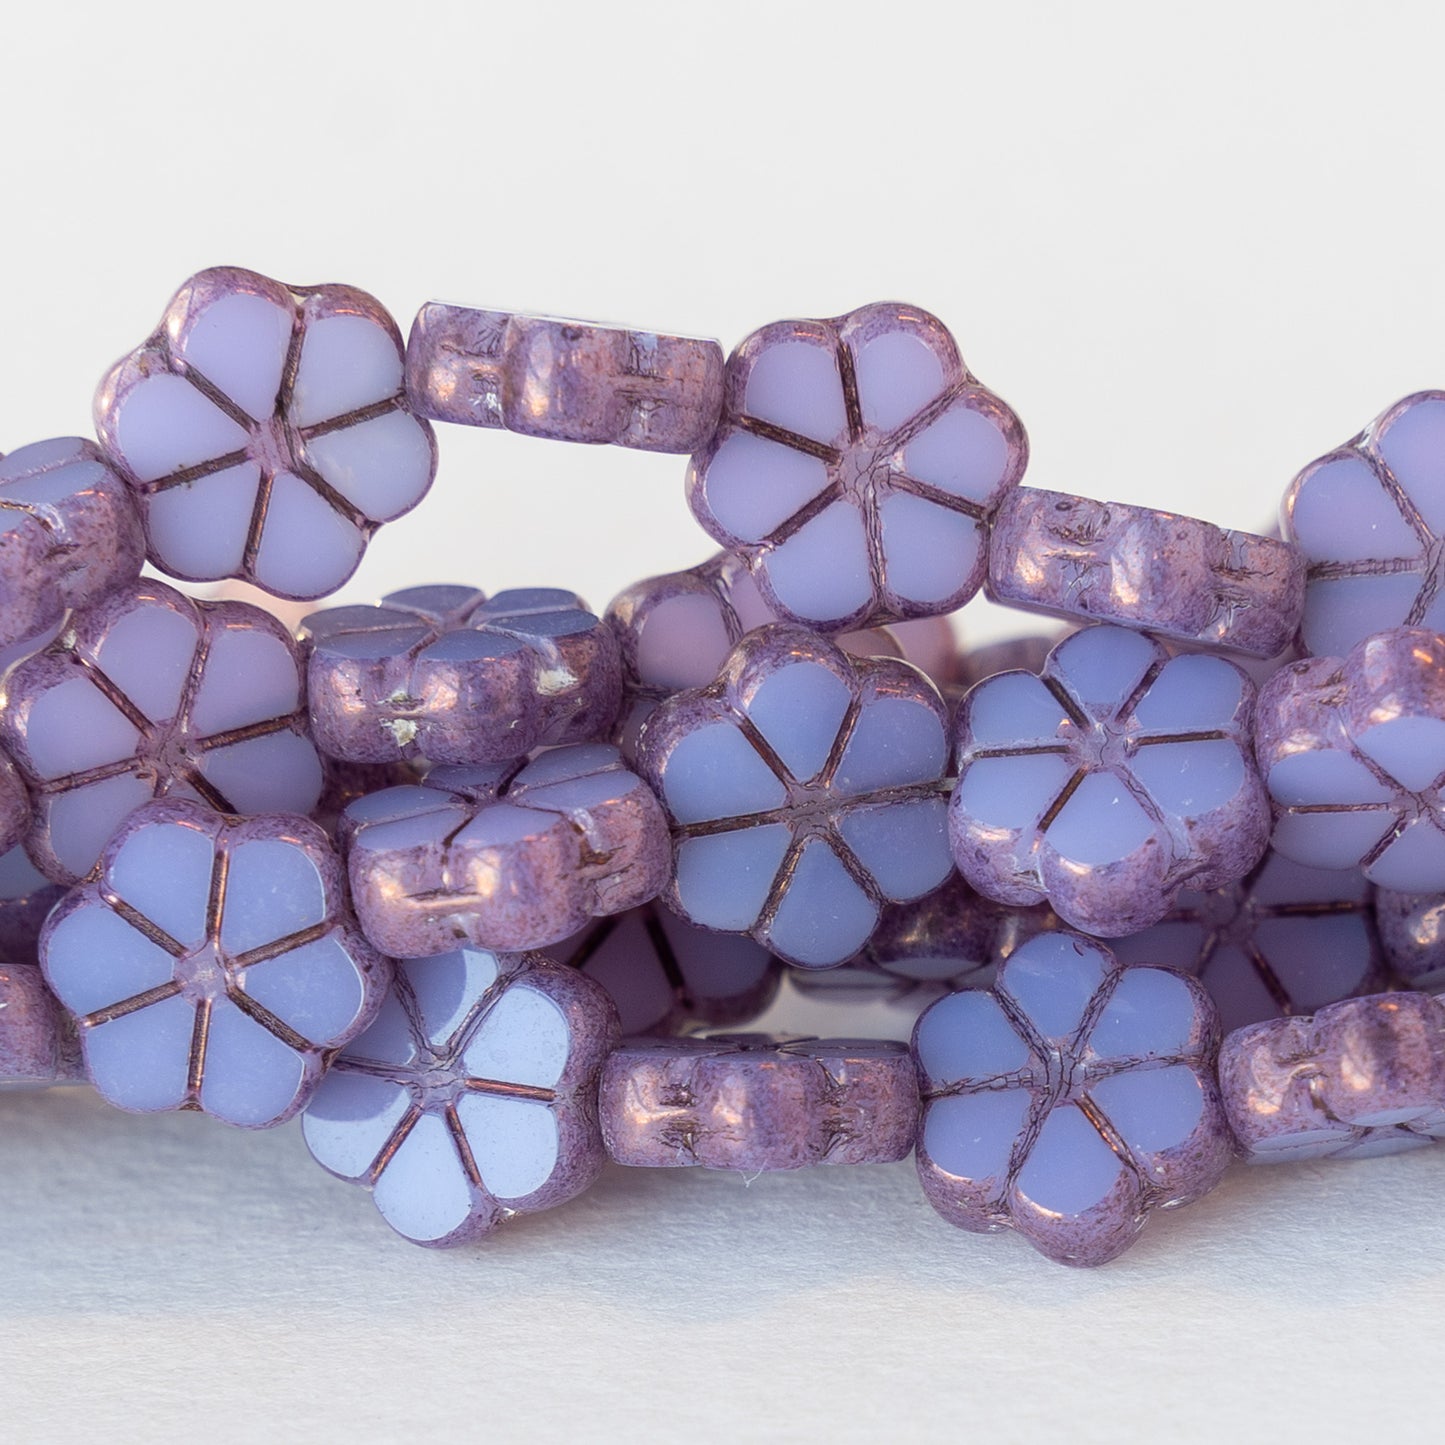 10mm Forget Me Not Flower Beads - Opaque Lavender - 15 Beads